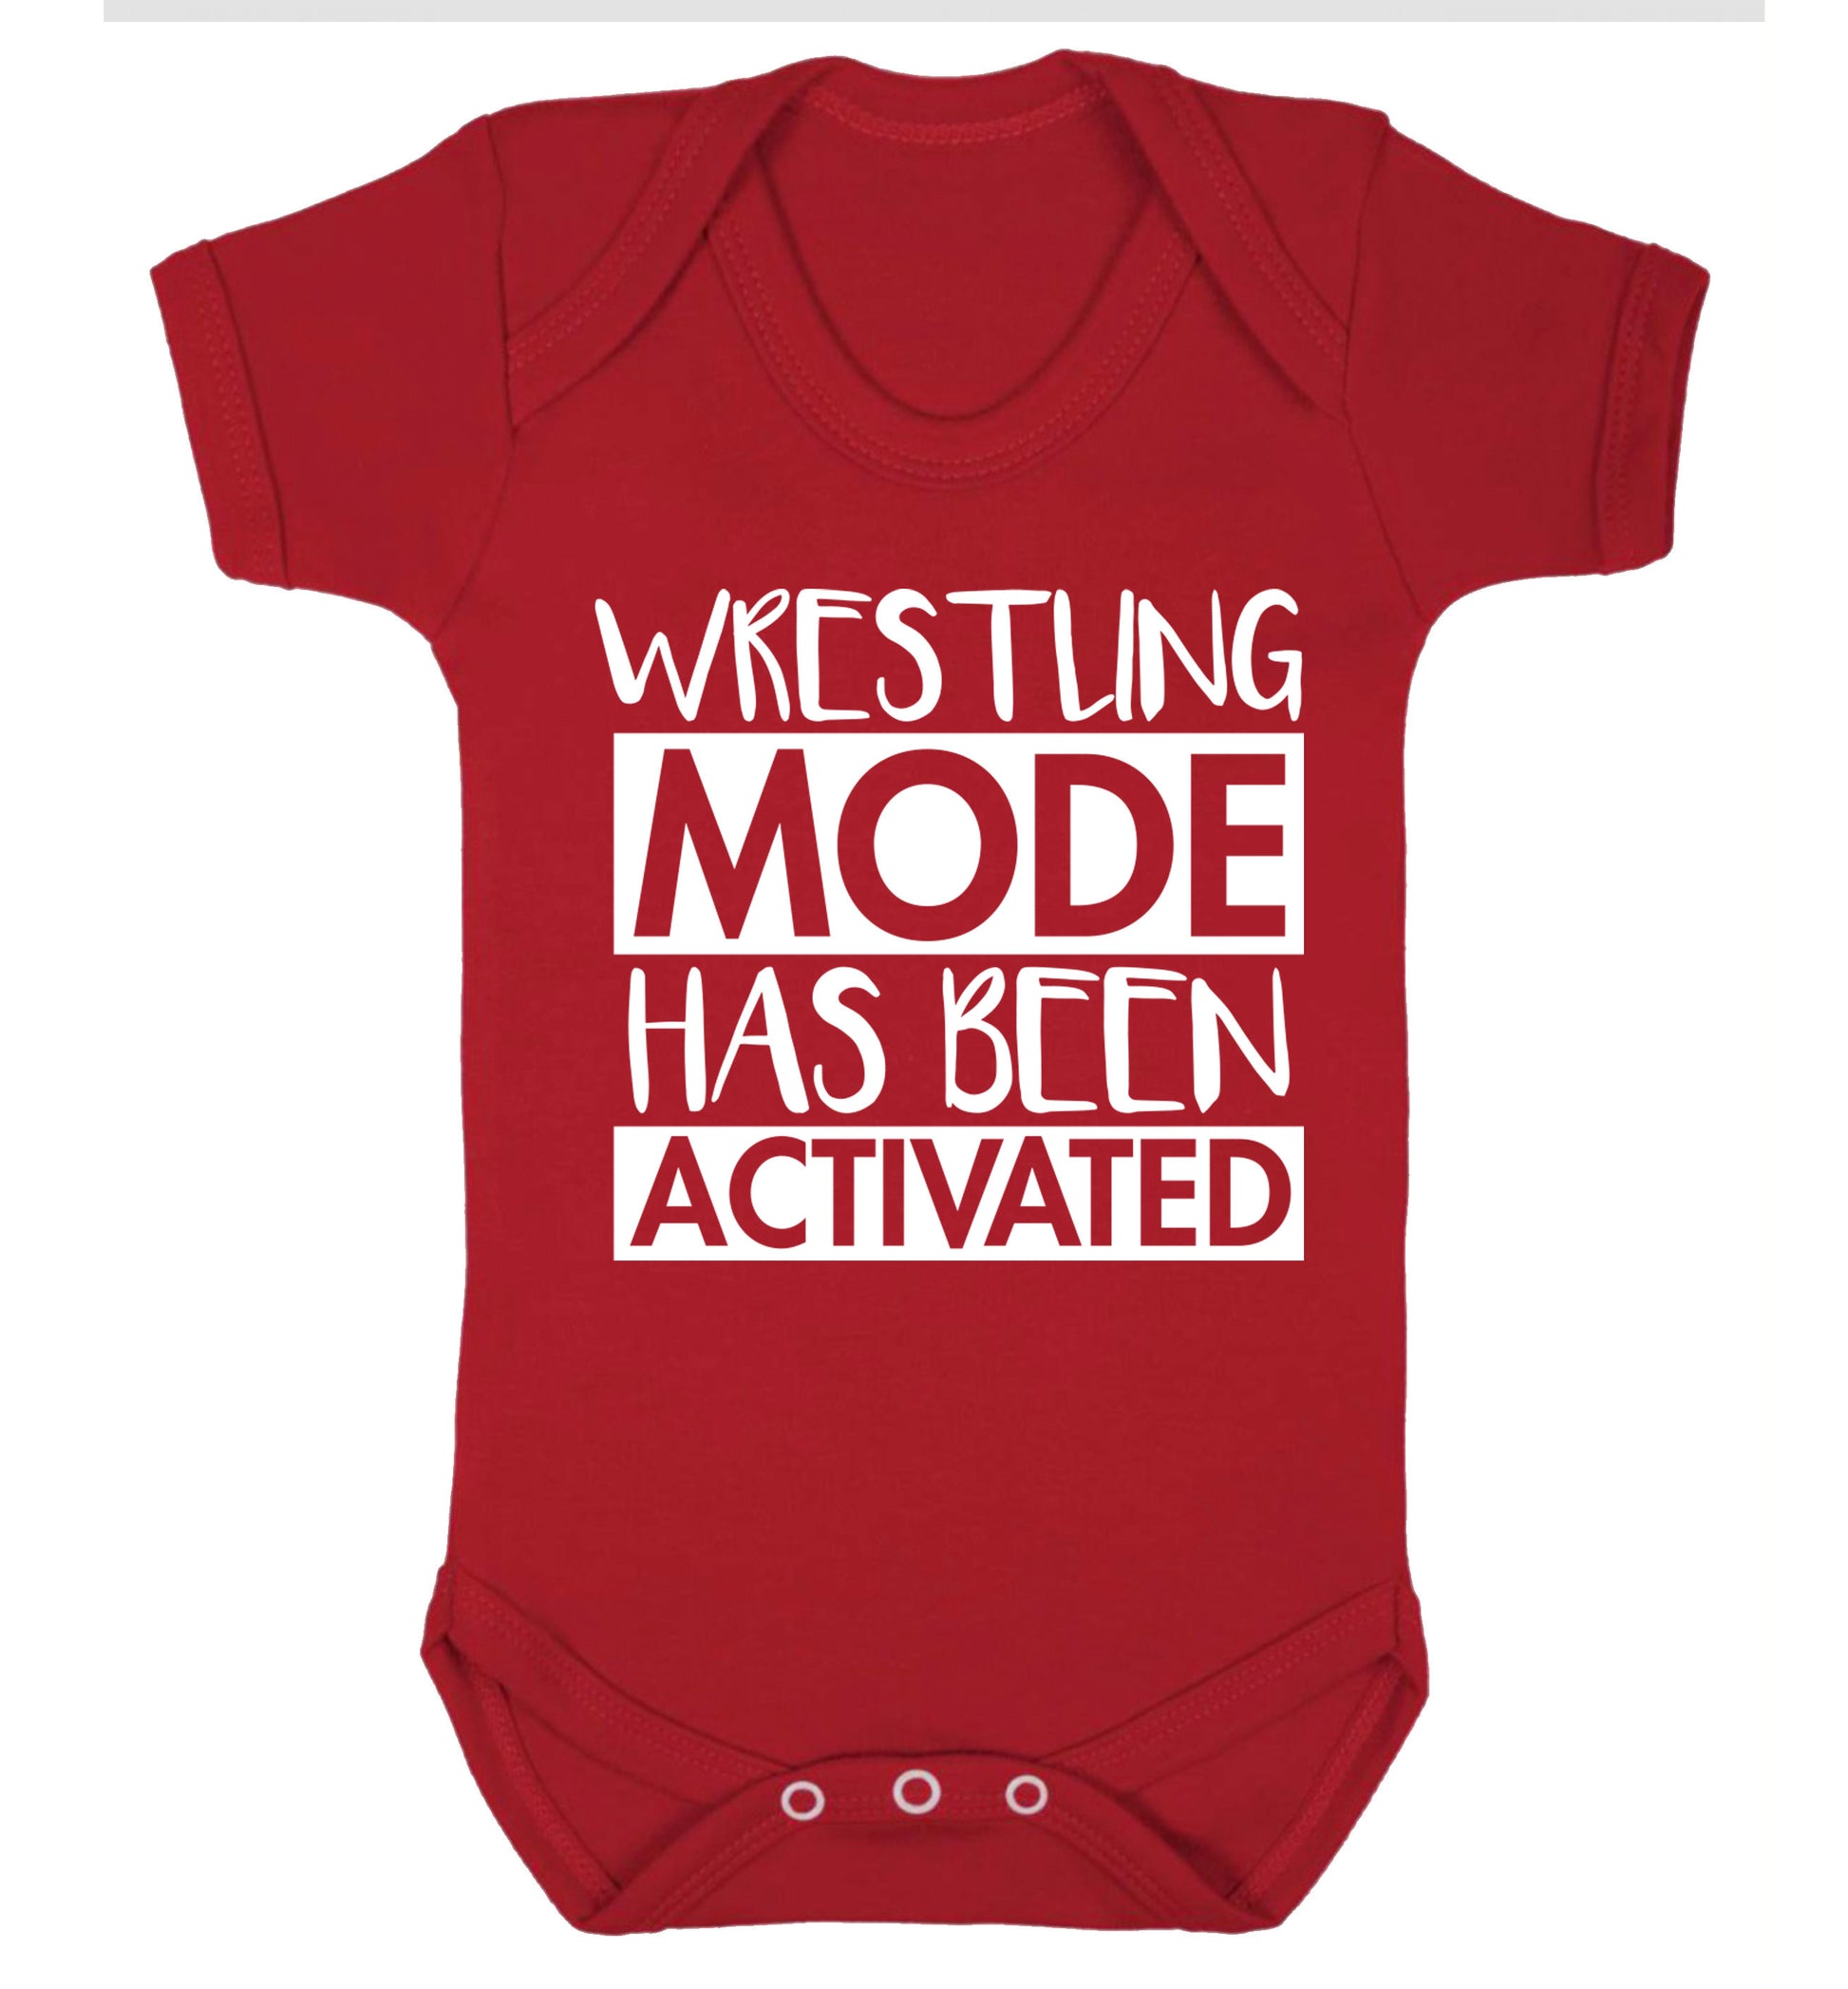 Wresting mode activated Baby Vest red 18-24 months